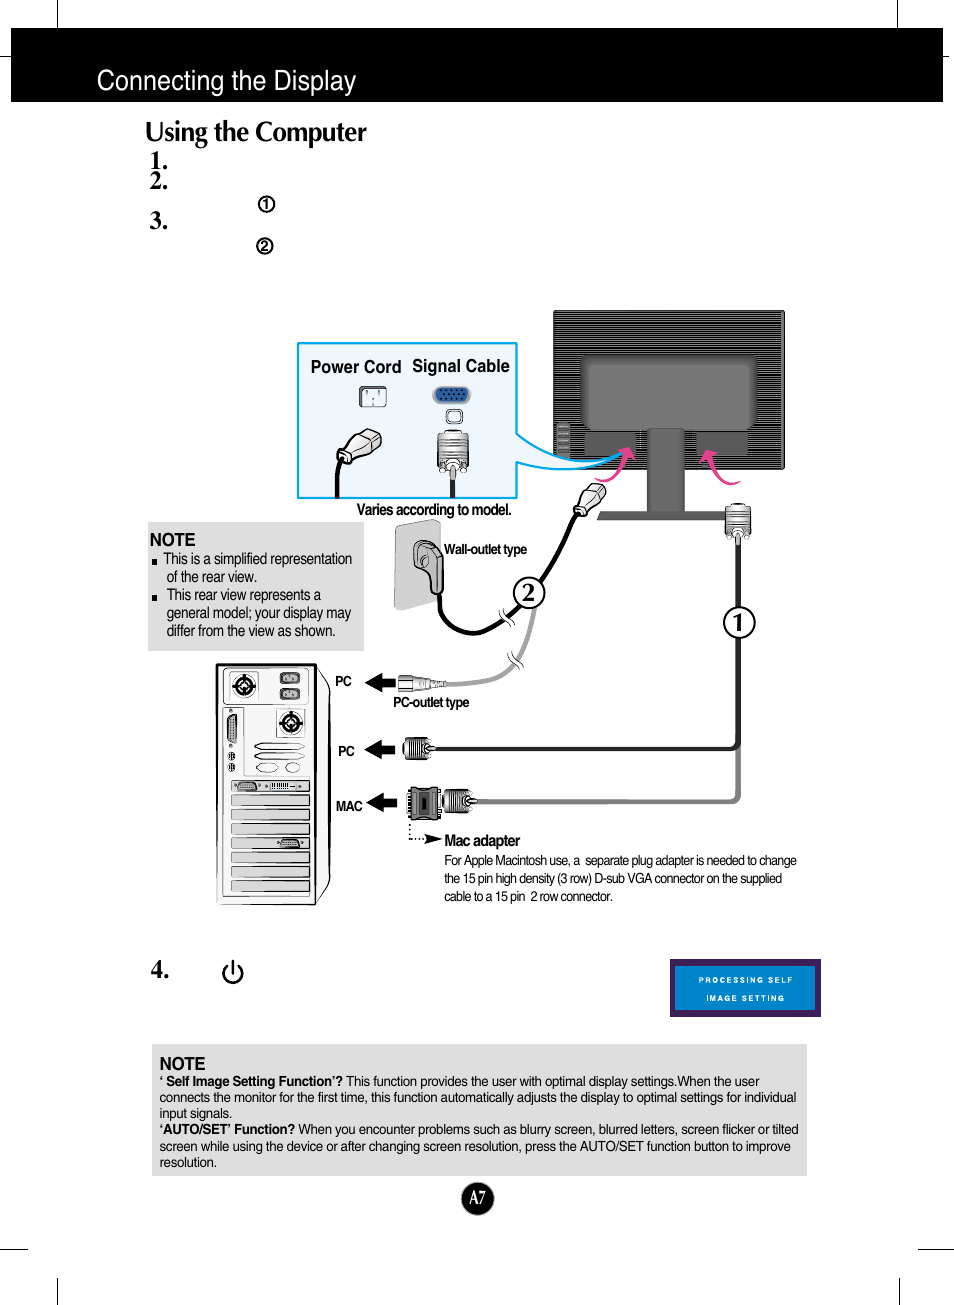 Using the computer, Connecting the display | LG L192WS-SN User Manual | Page 8 / 24